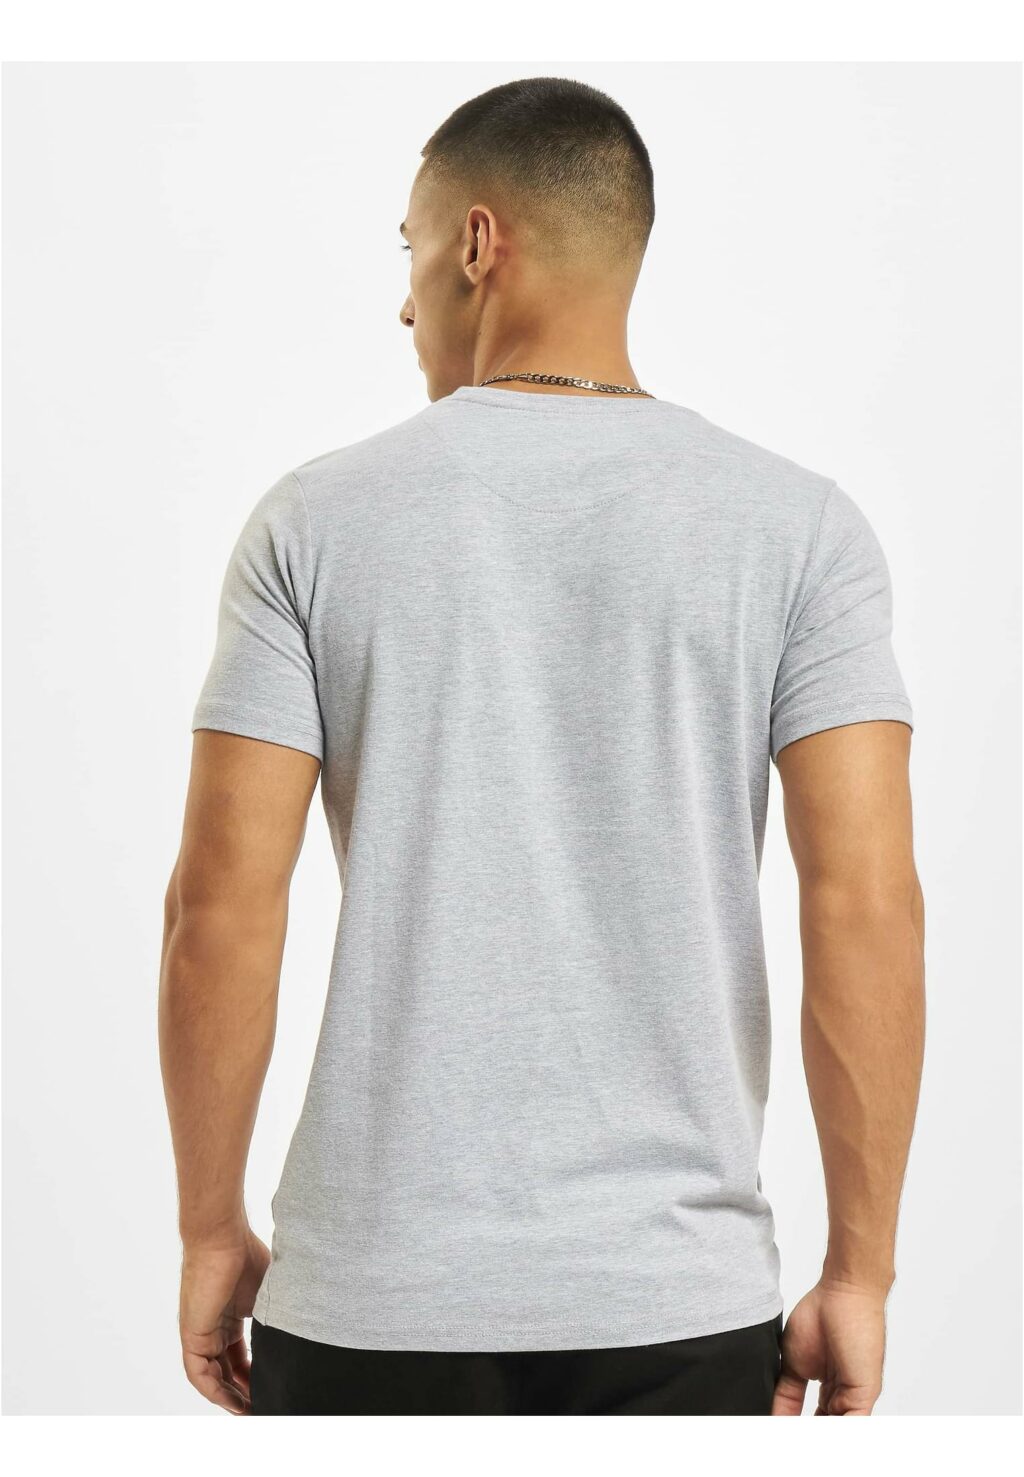 DEF Weary 3-Pack T-Shirt grey+grey+grey DFTS122